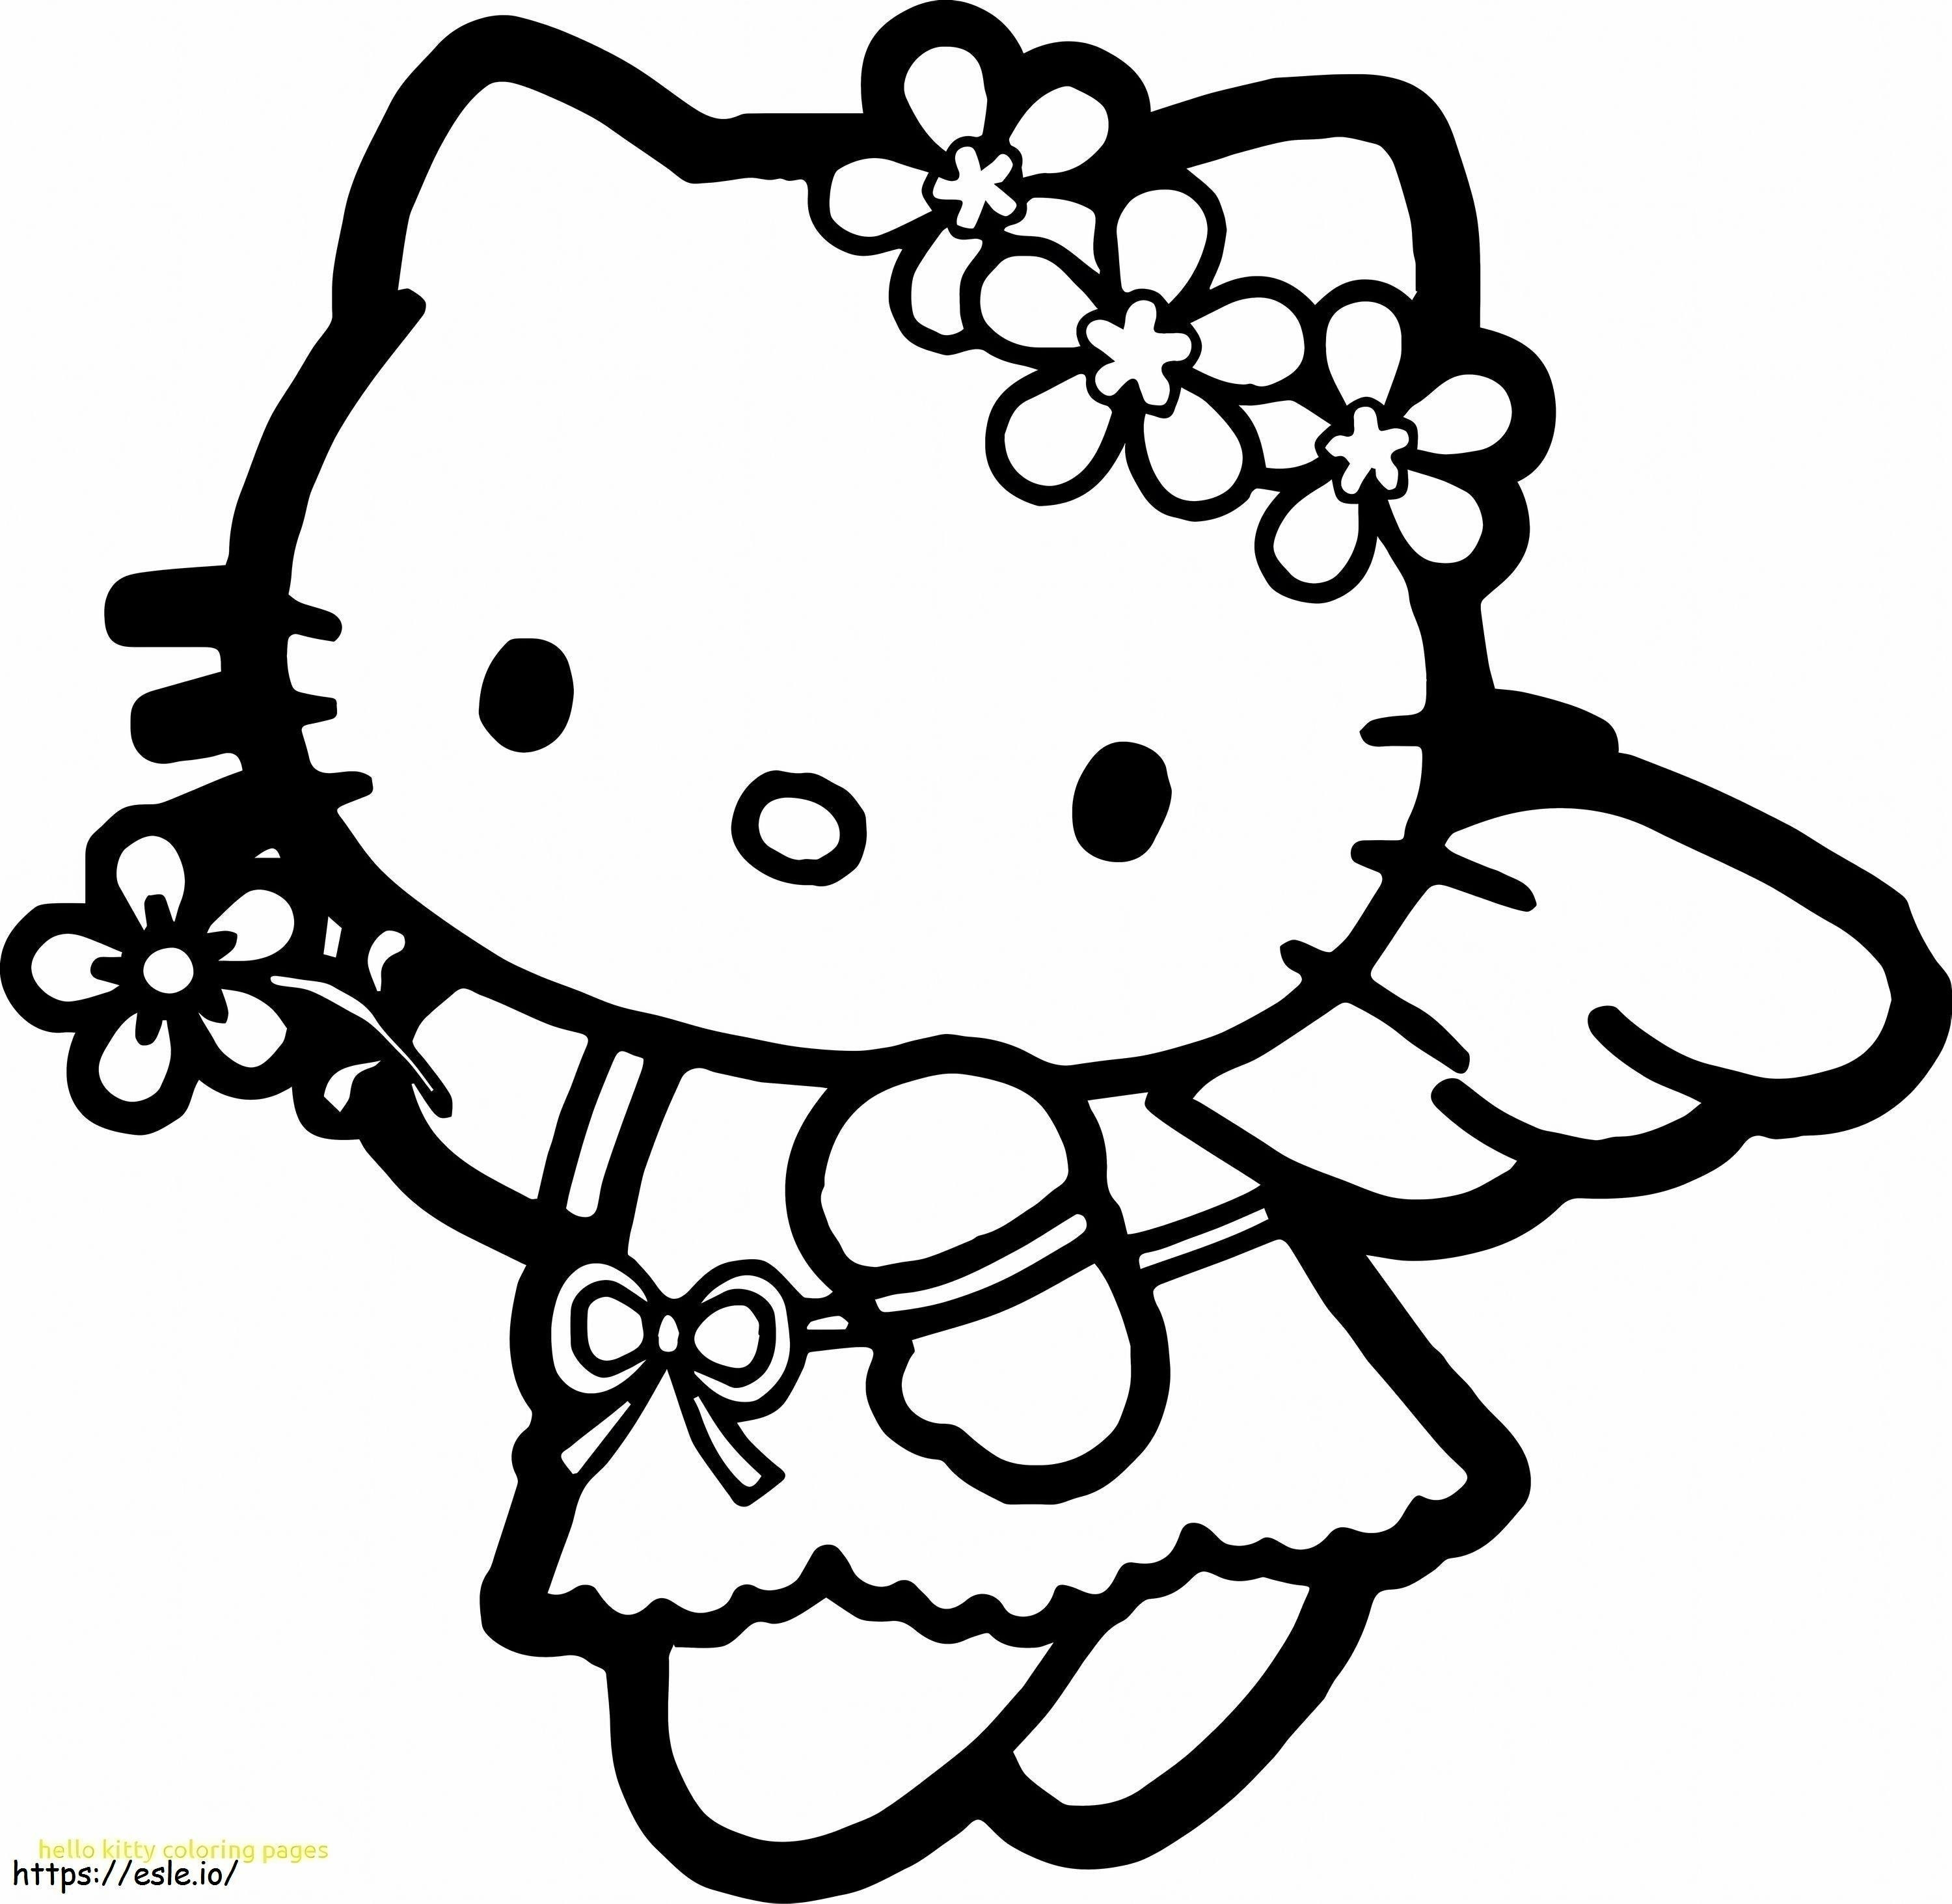 1539941658 Coloring Sheets For Hello Kitty Refrence Hello Kitty New Hello Kitty Fresh Hello Of Coloring Sheets For Hello Kitty coloring page